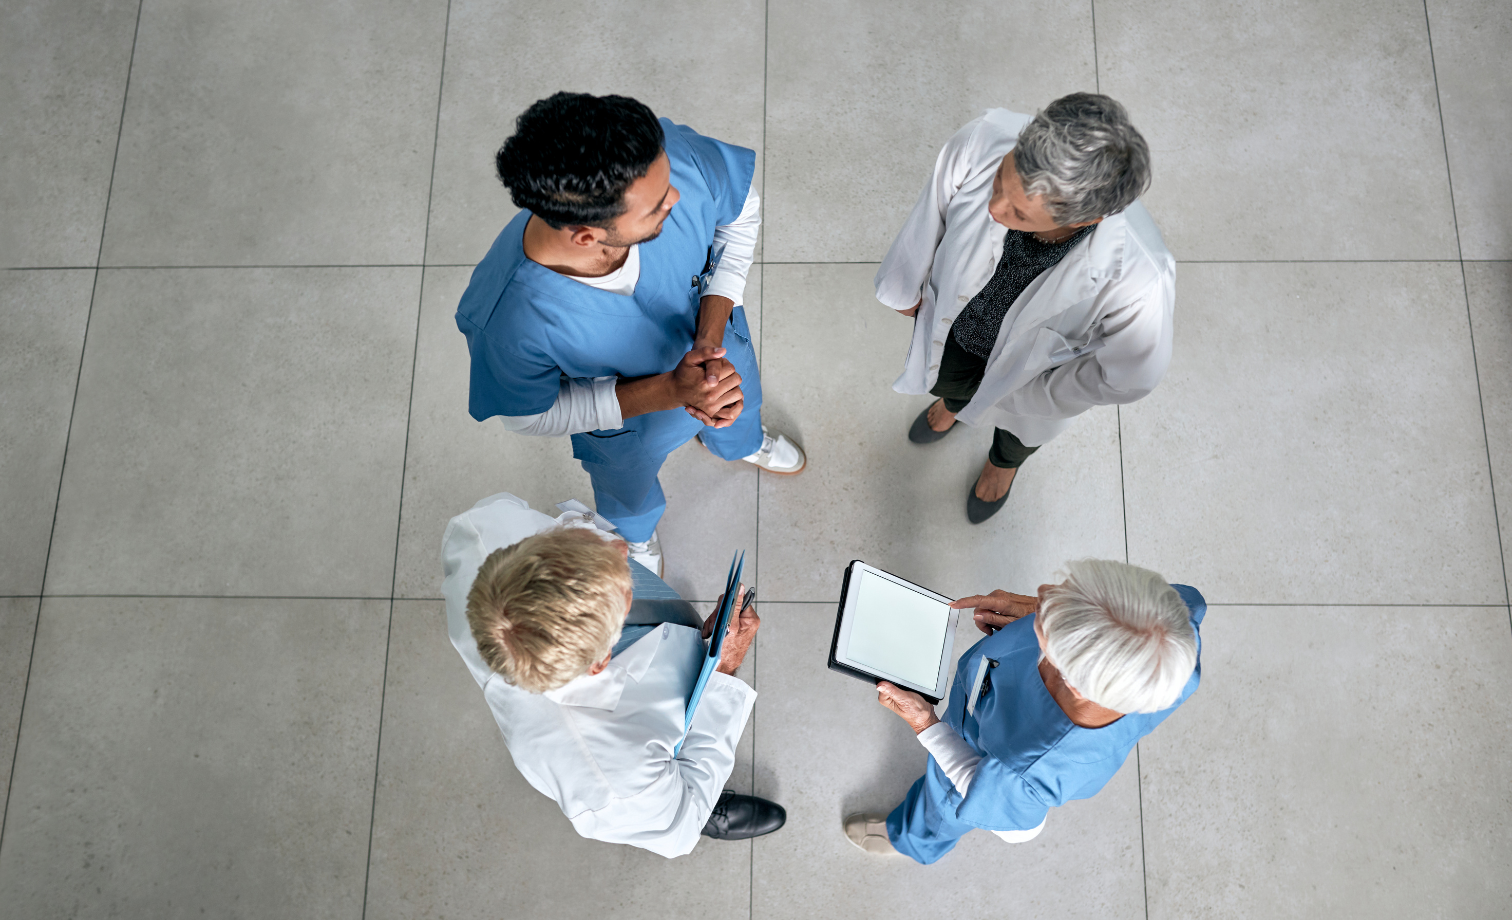 Four health care professionals standing facing each other engaged in a group discussing 